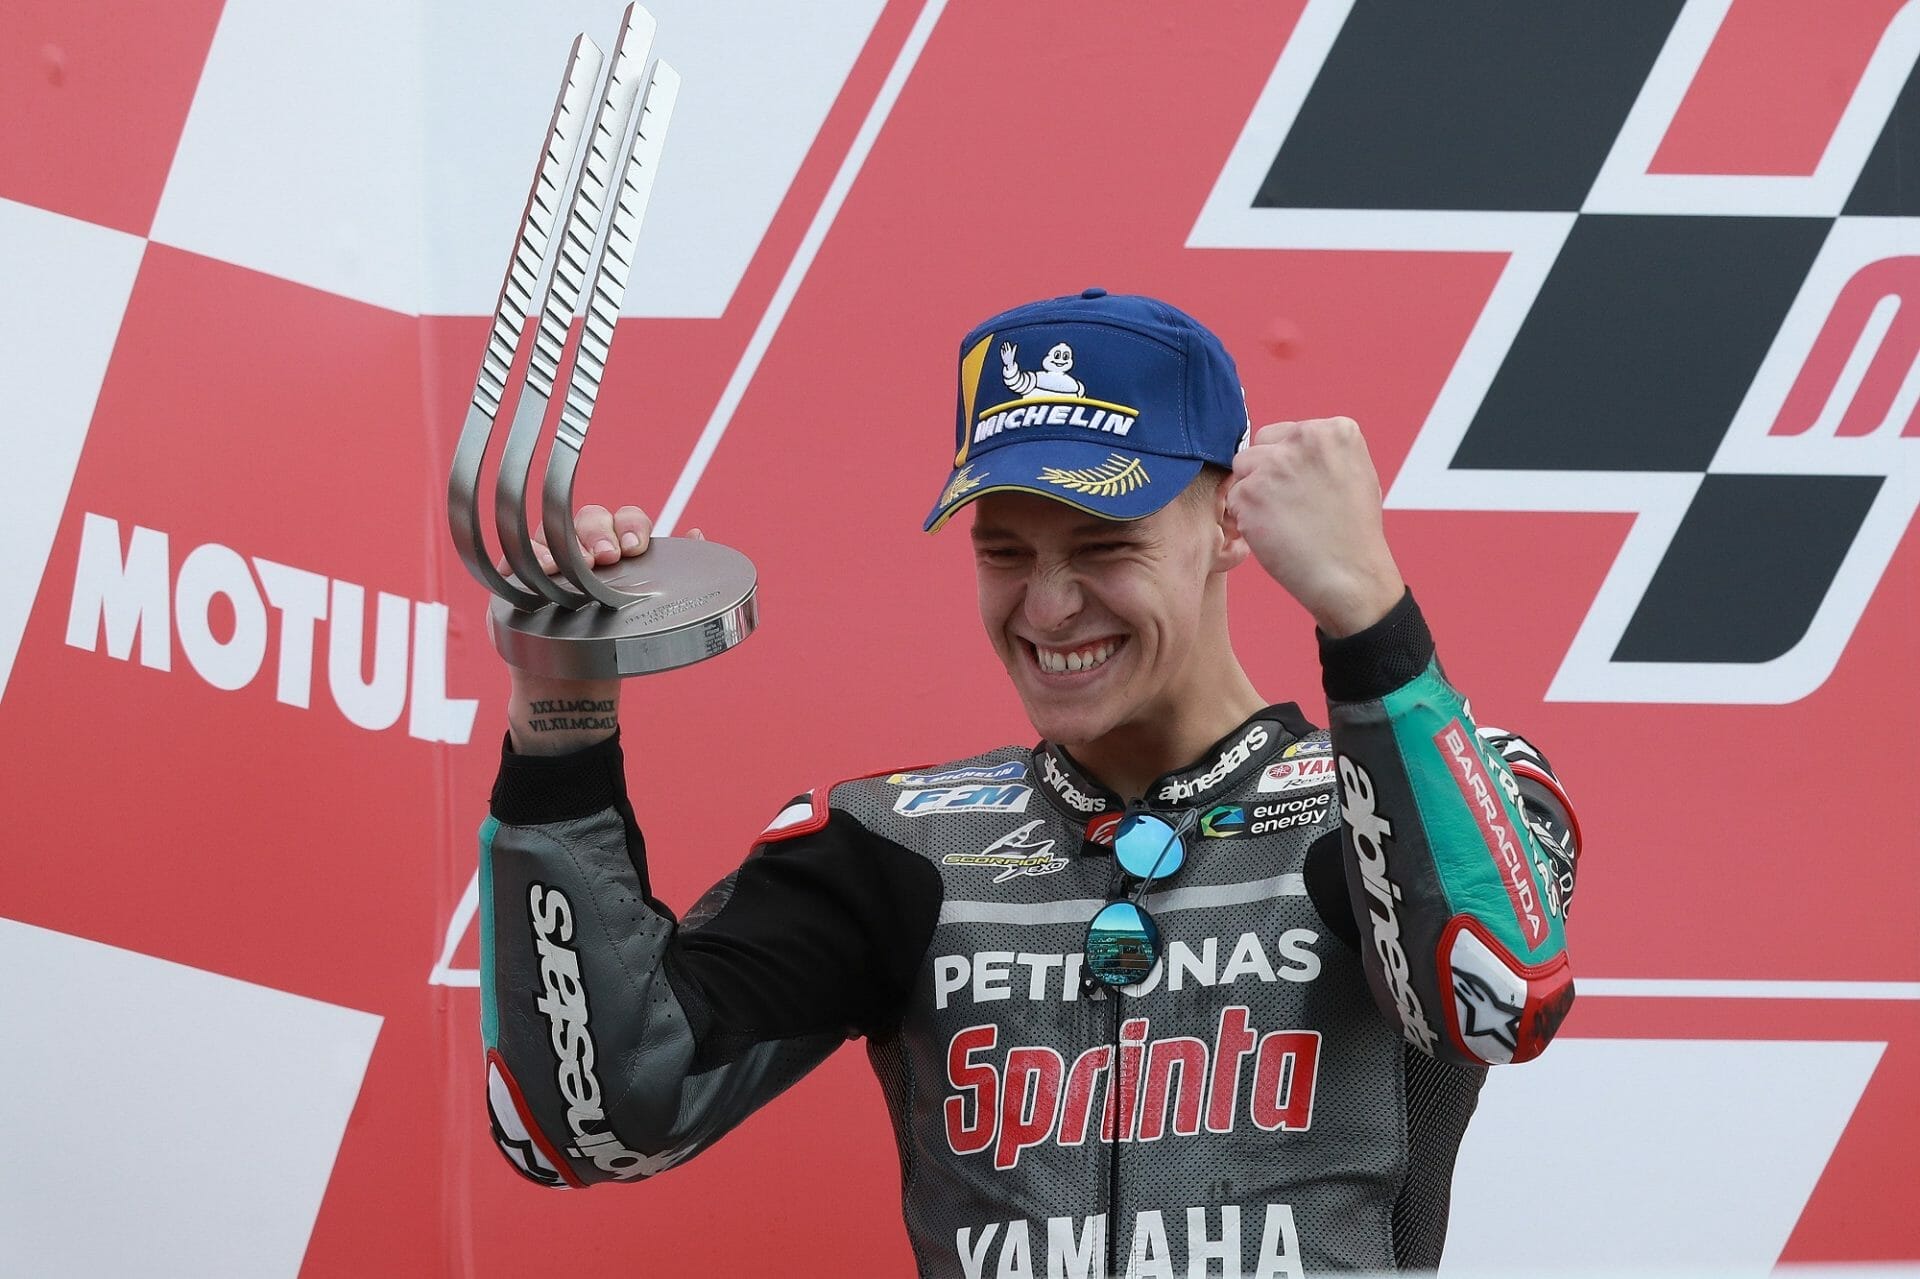 Fabio Quartararo will drive for the Yamaha factory team in 2021/22
- also in the APP MOTORCYCLE NEWS